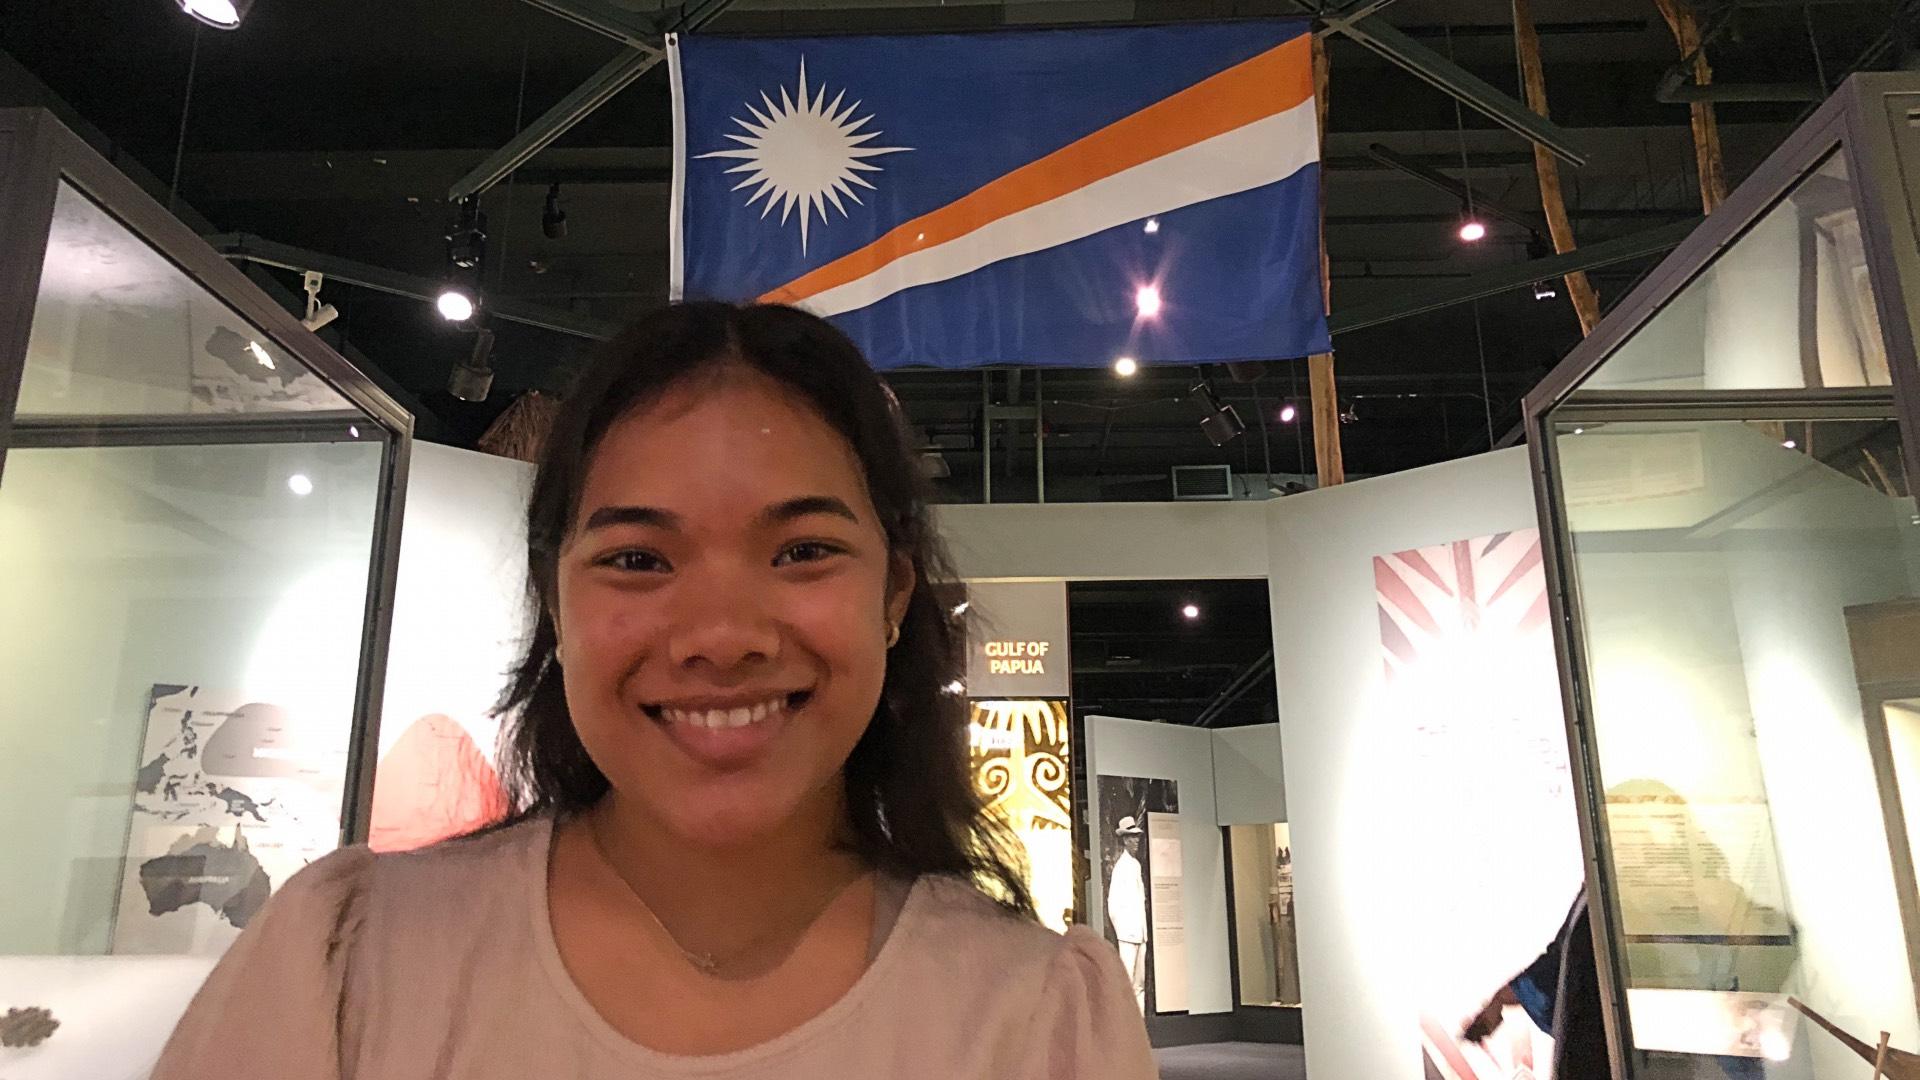 Evencilla Malolo was among the students from Enid, Okla., who collaborated with the Field Museum on the Marshall Island exhibit. (Patty Wetli / WTTW News)